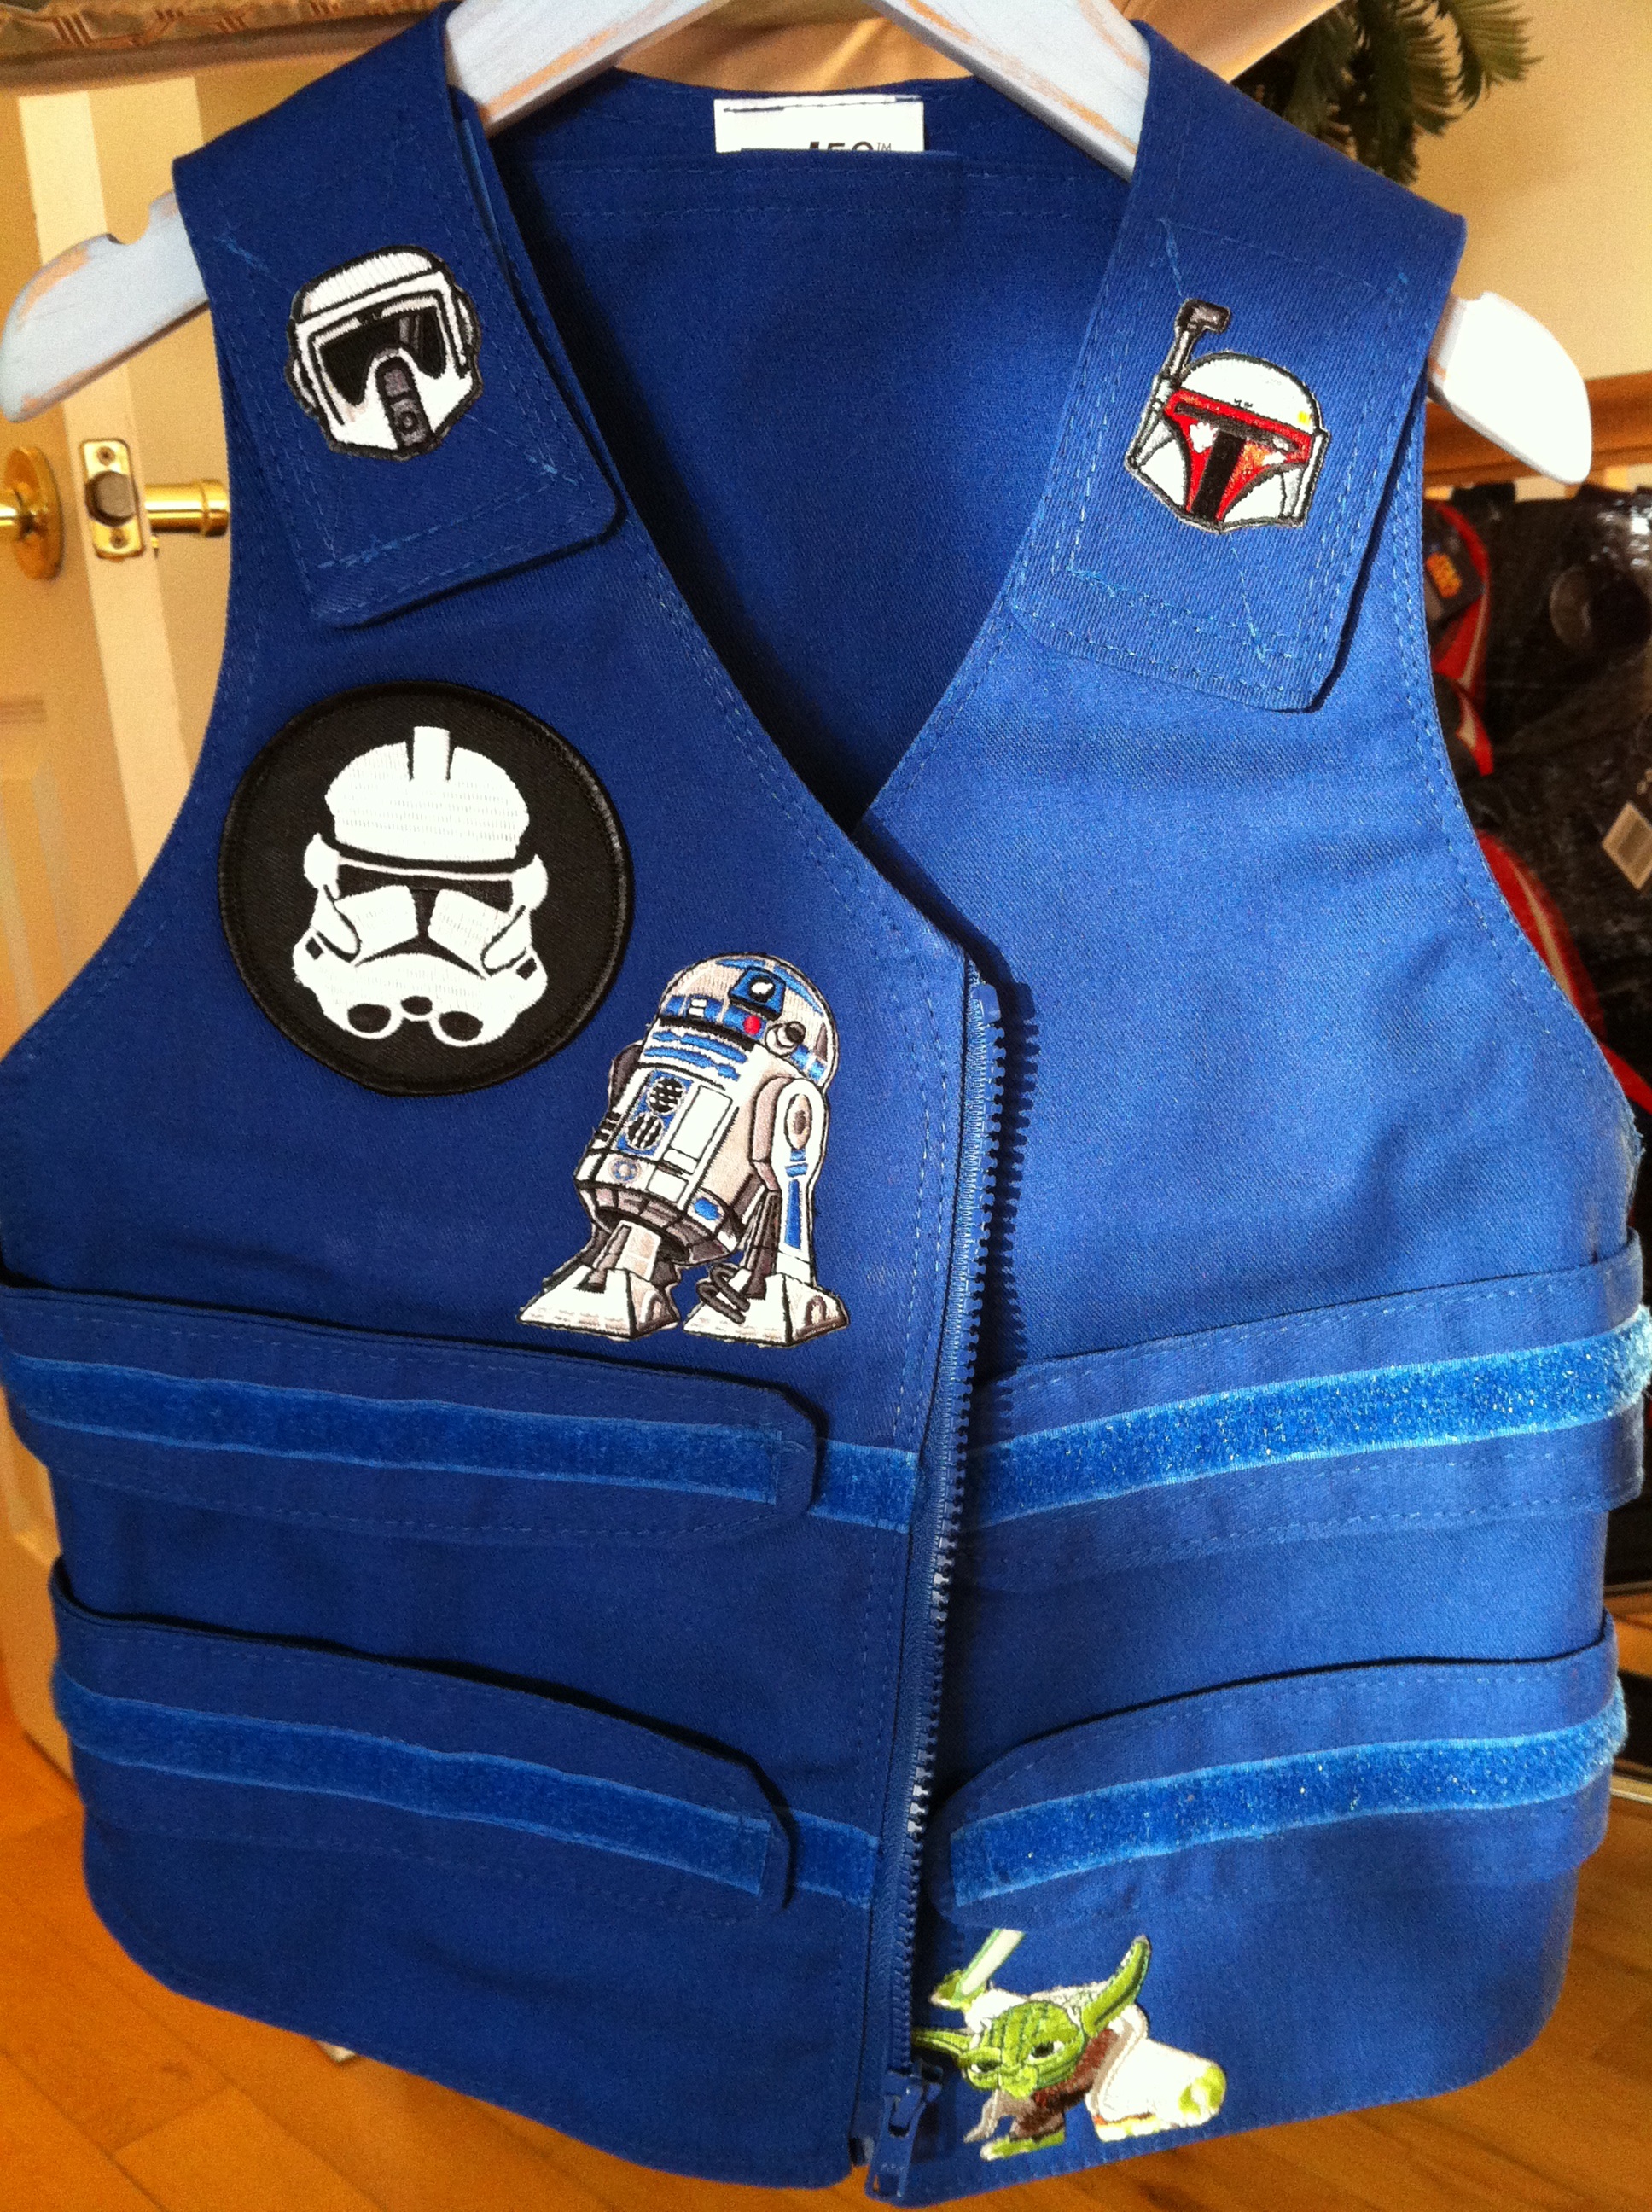 Blue Cool Kids toddlers cooling vest with star wars patches sewn on